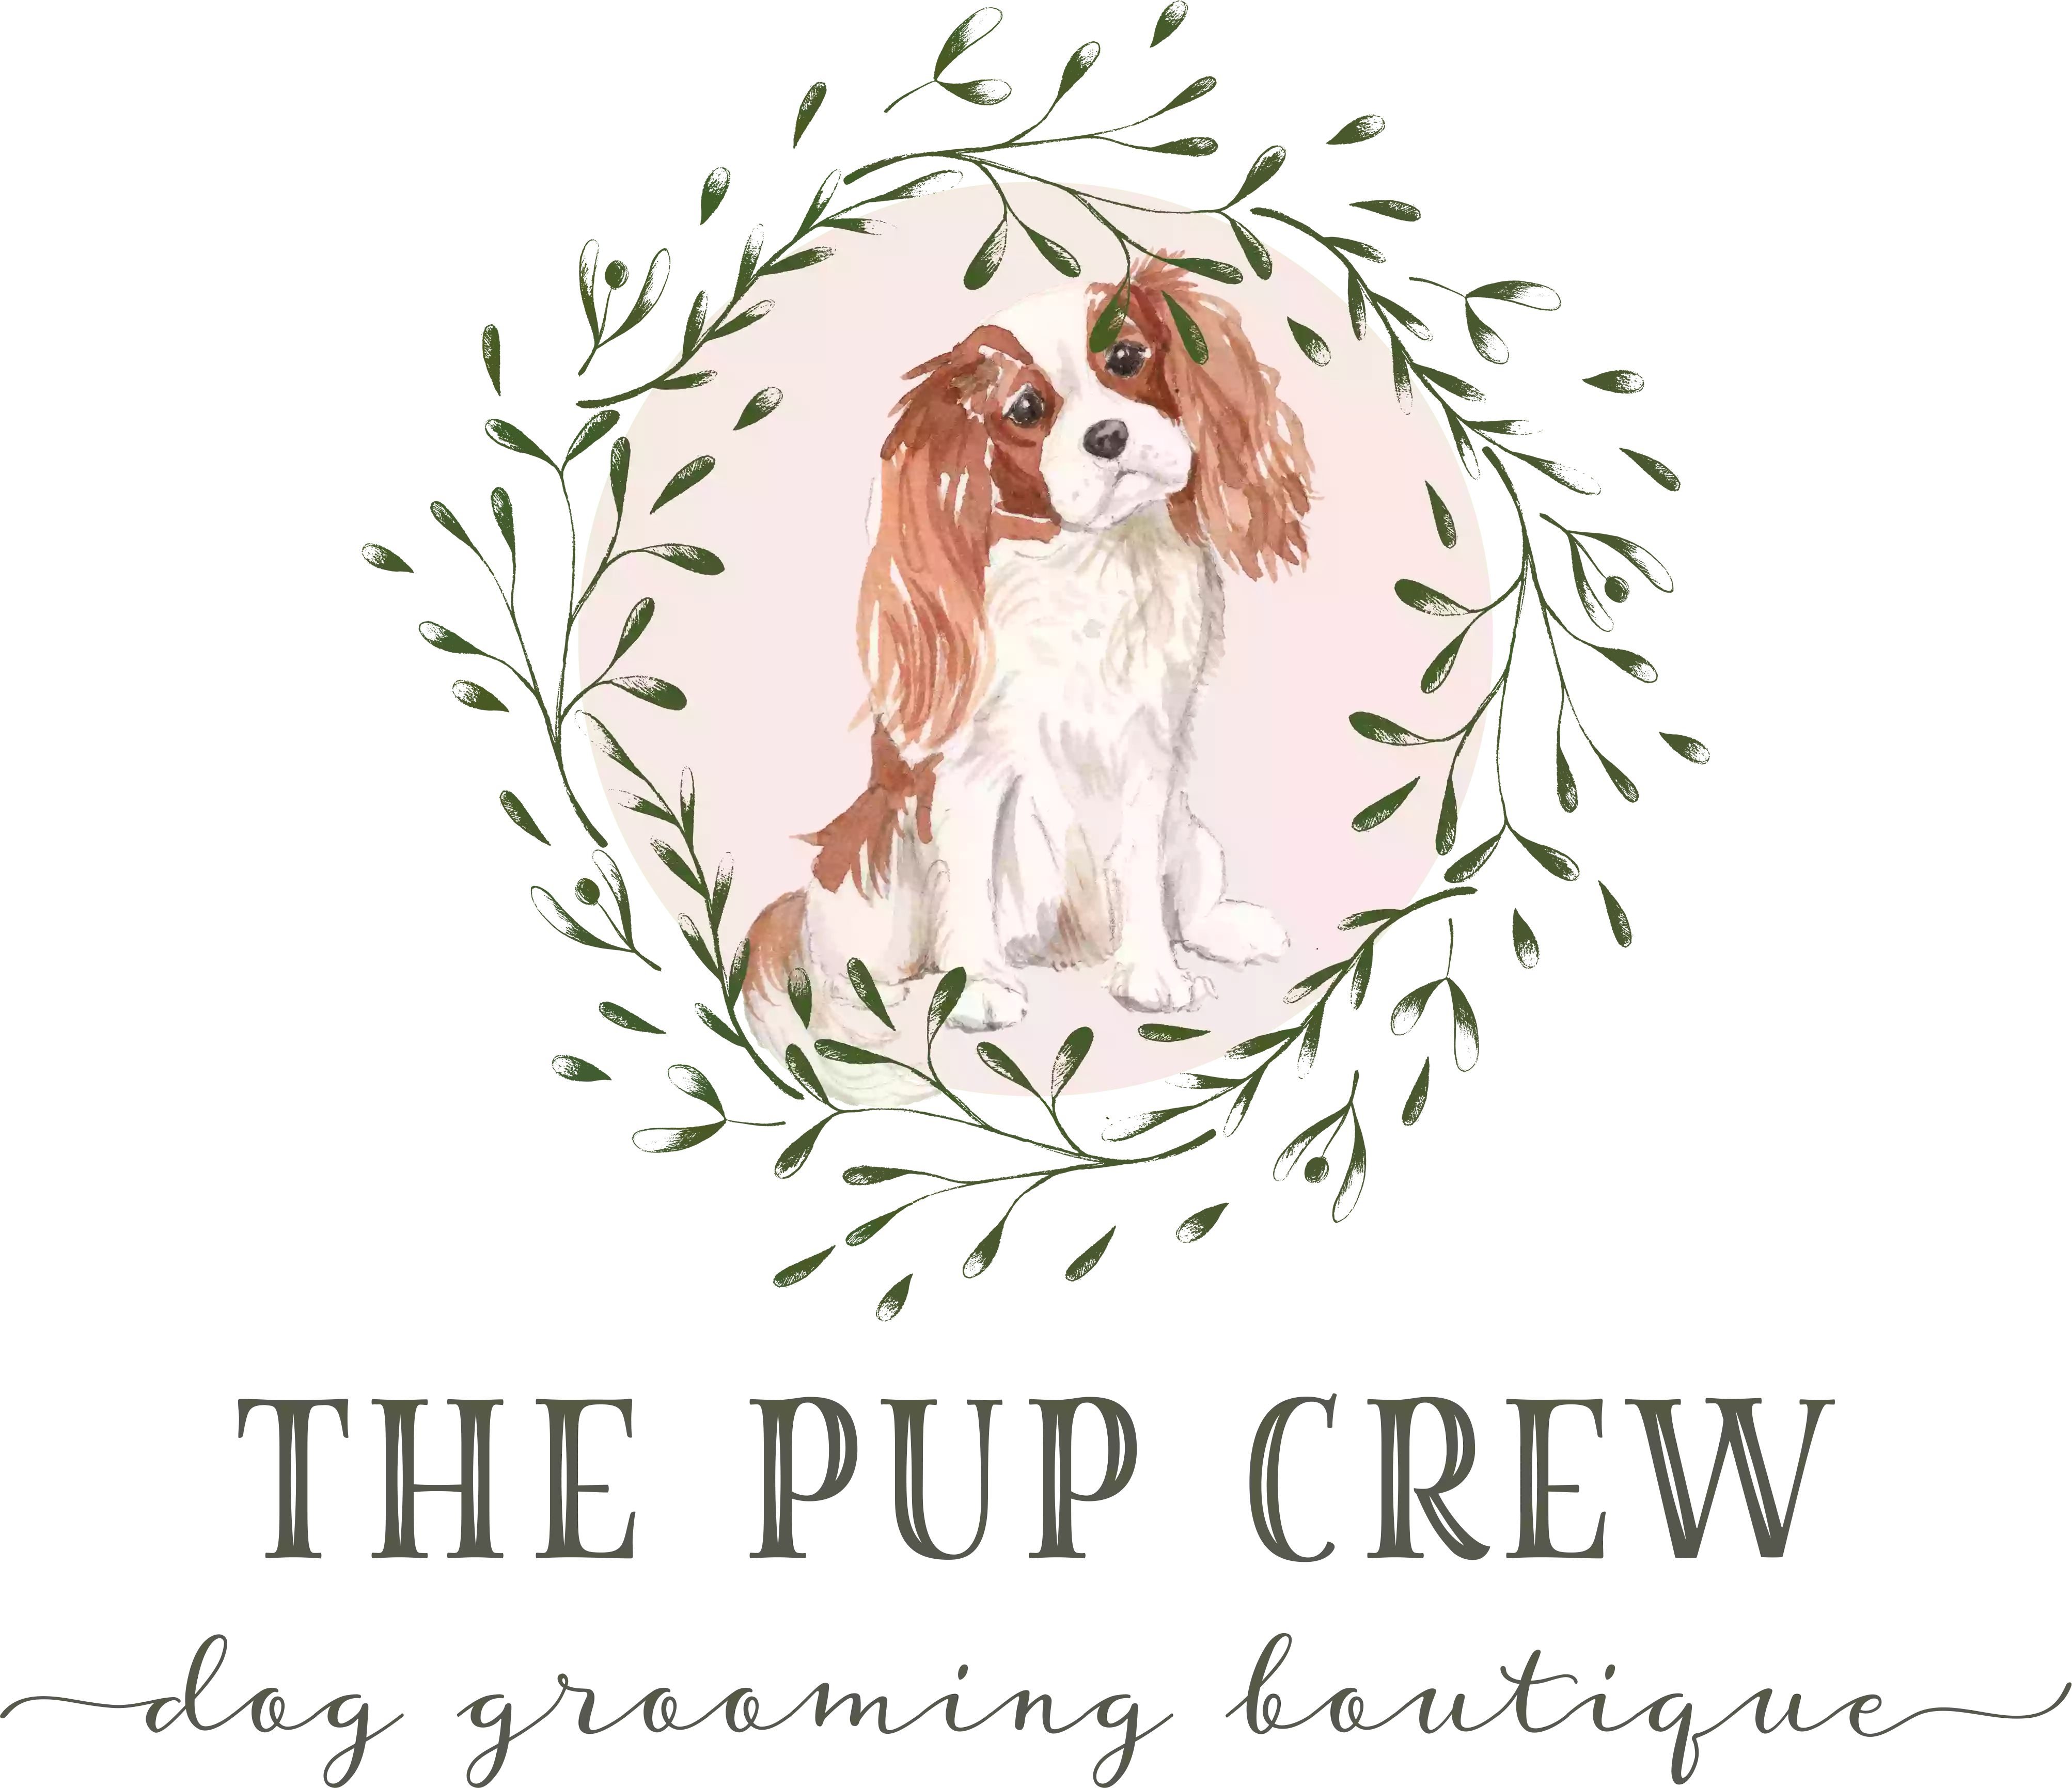 The Pup Crew Dog Grooming Boutique